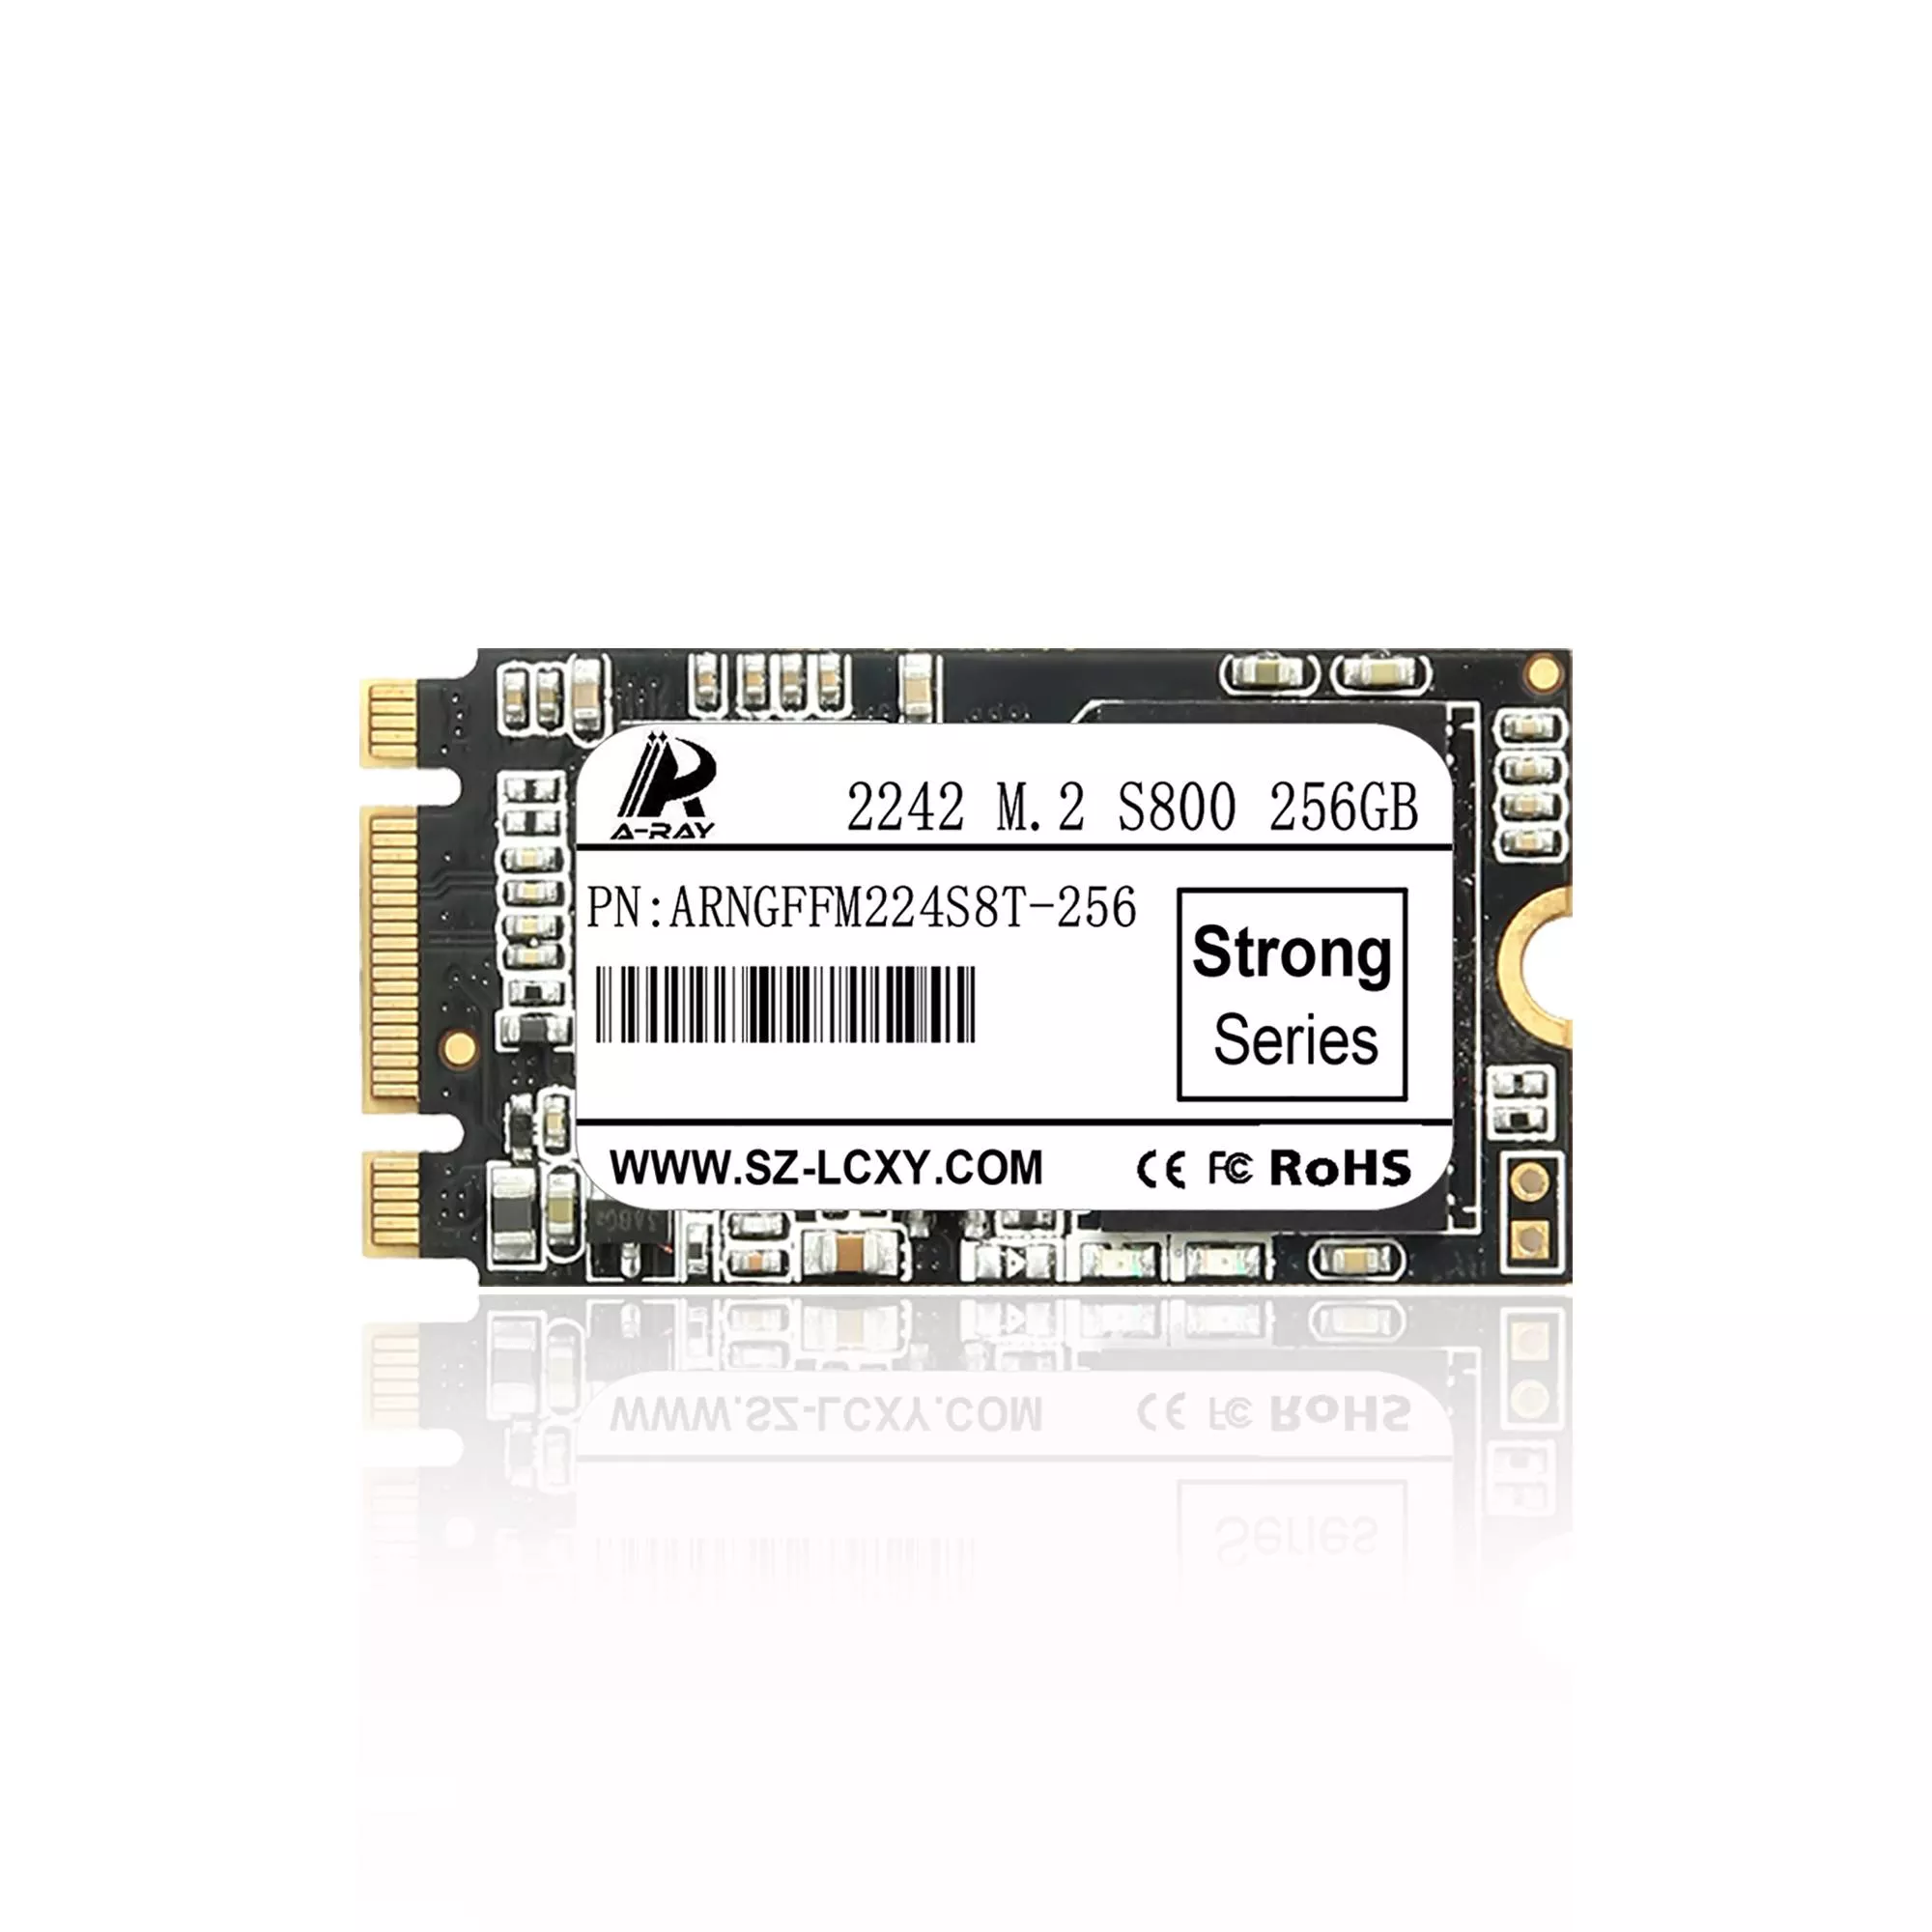 Ổ cứng SSD 256GB A-RAY 2242 NGFF M.2 6GBps S800 Strong Series